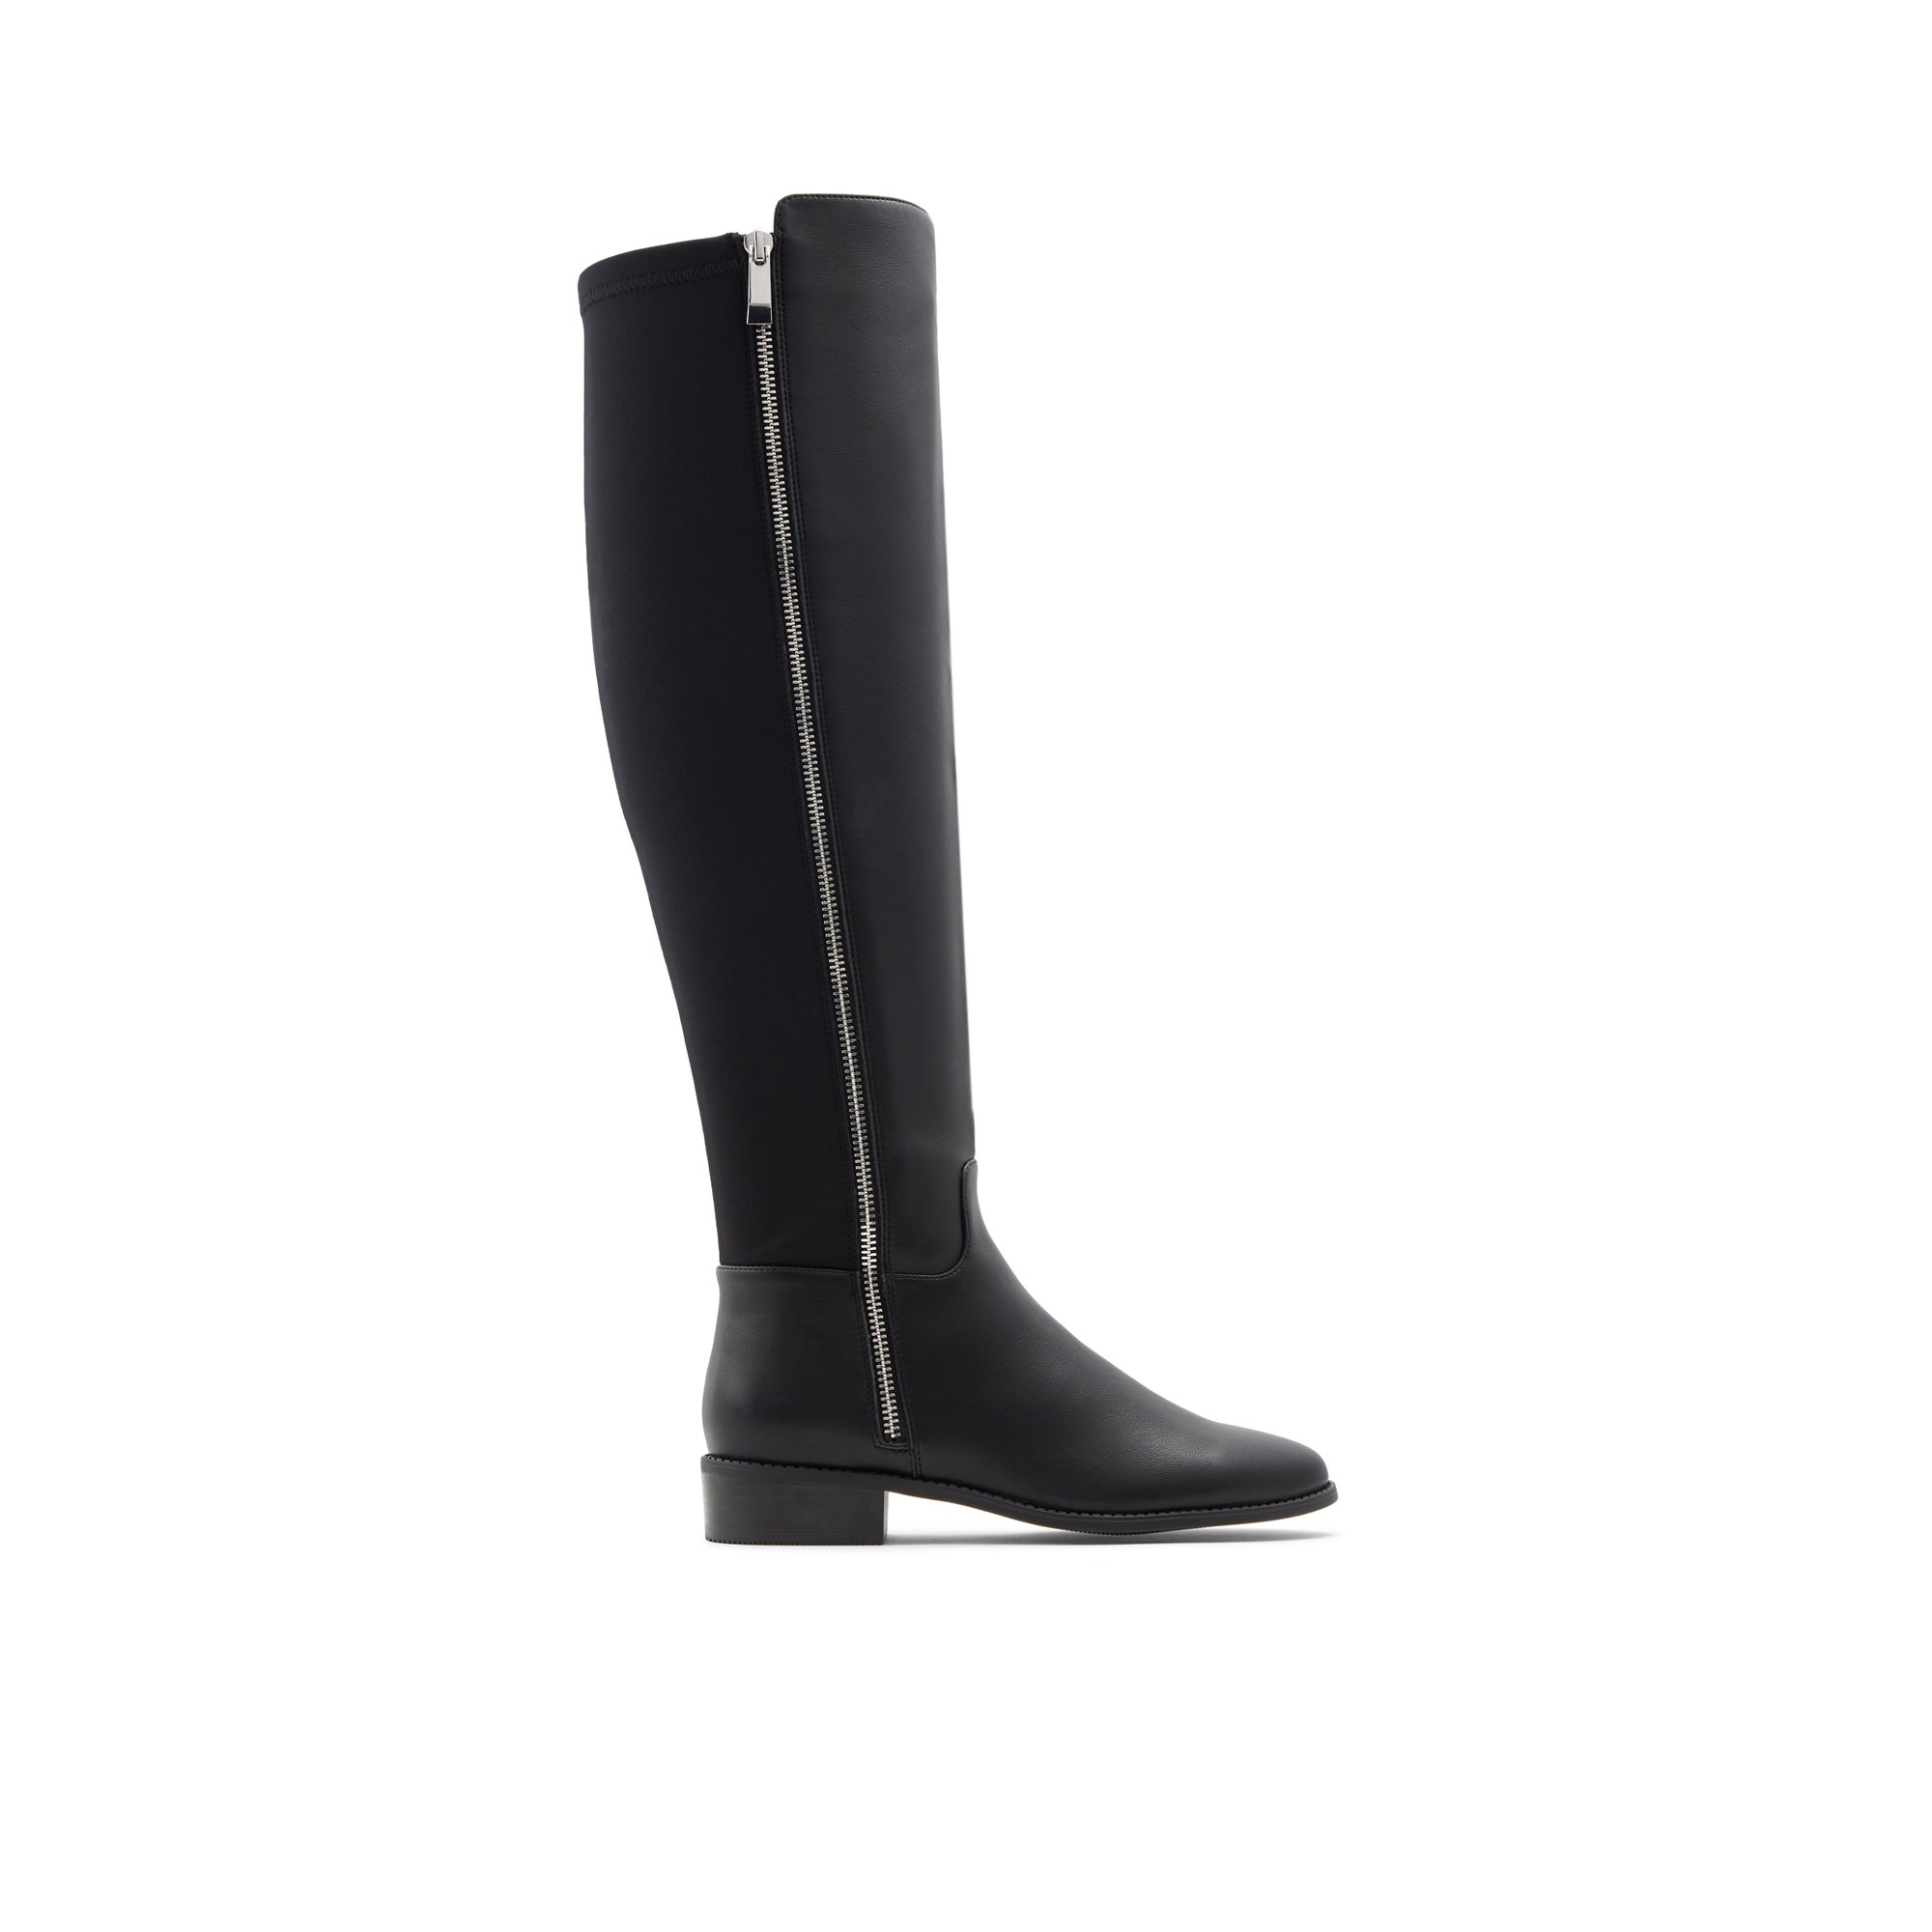 ALDO Aahliyah - Women's Boots Casual - Black